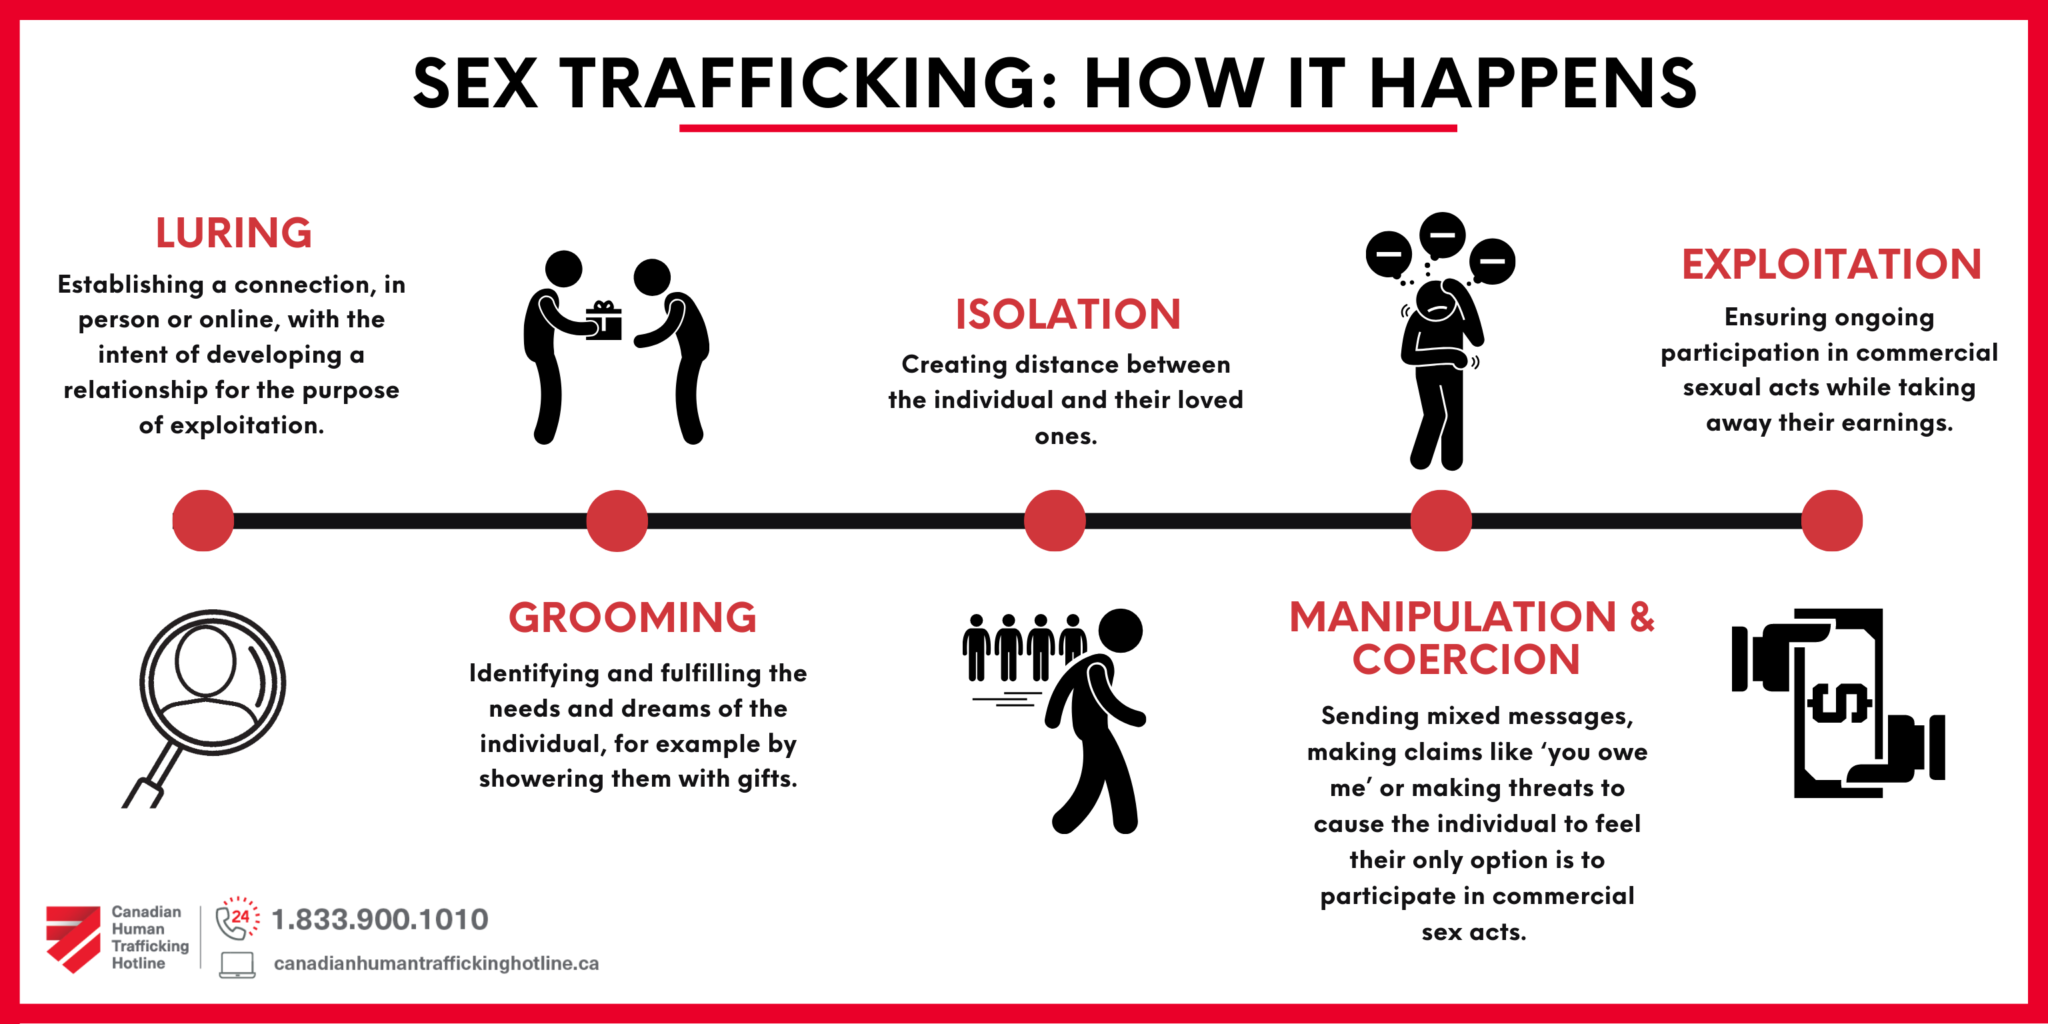 Myths Facts And Alternatives For Sex Trafficking Imagery The Canadian Centre To End Human